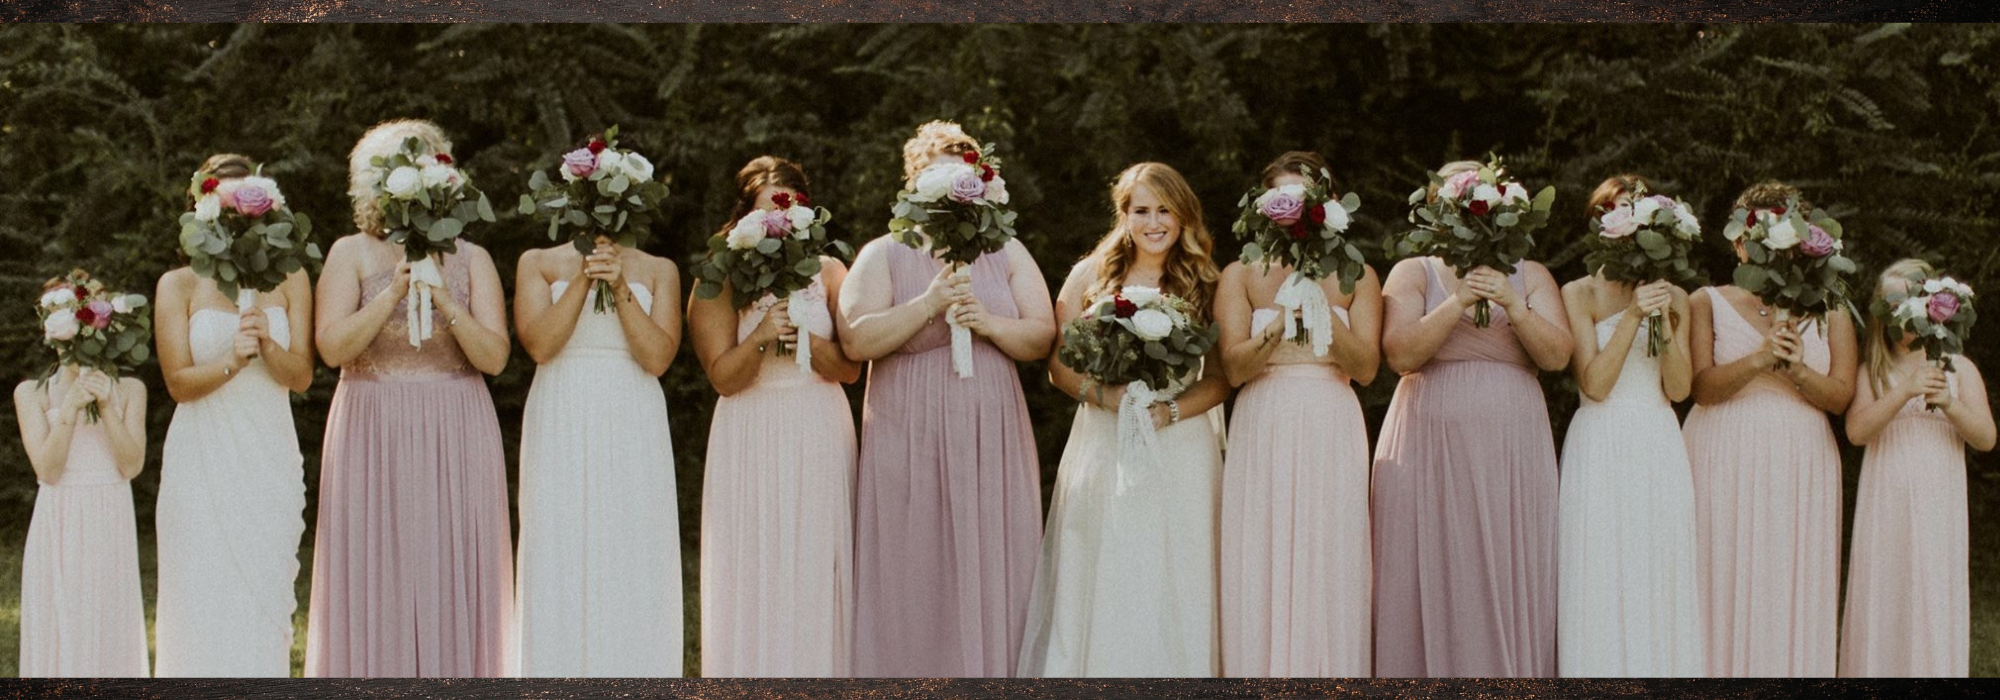 bridal party holding bouquets 